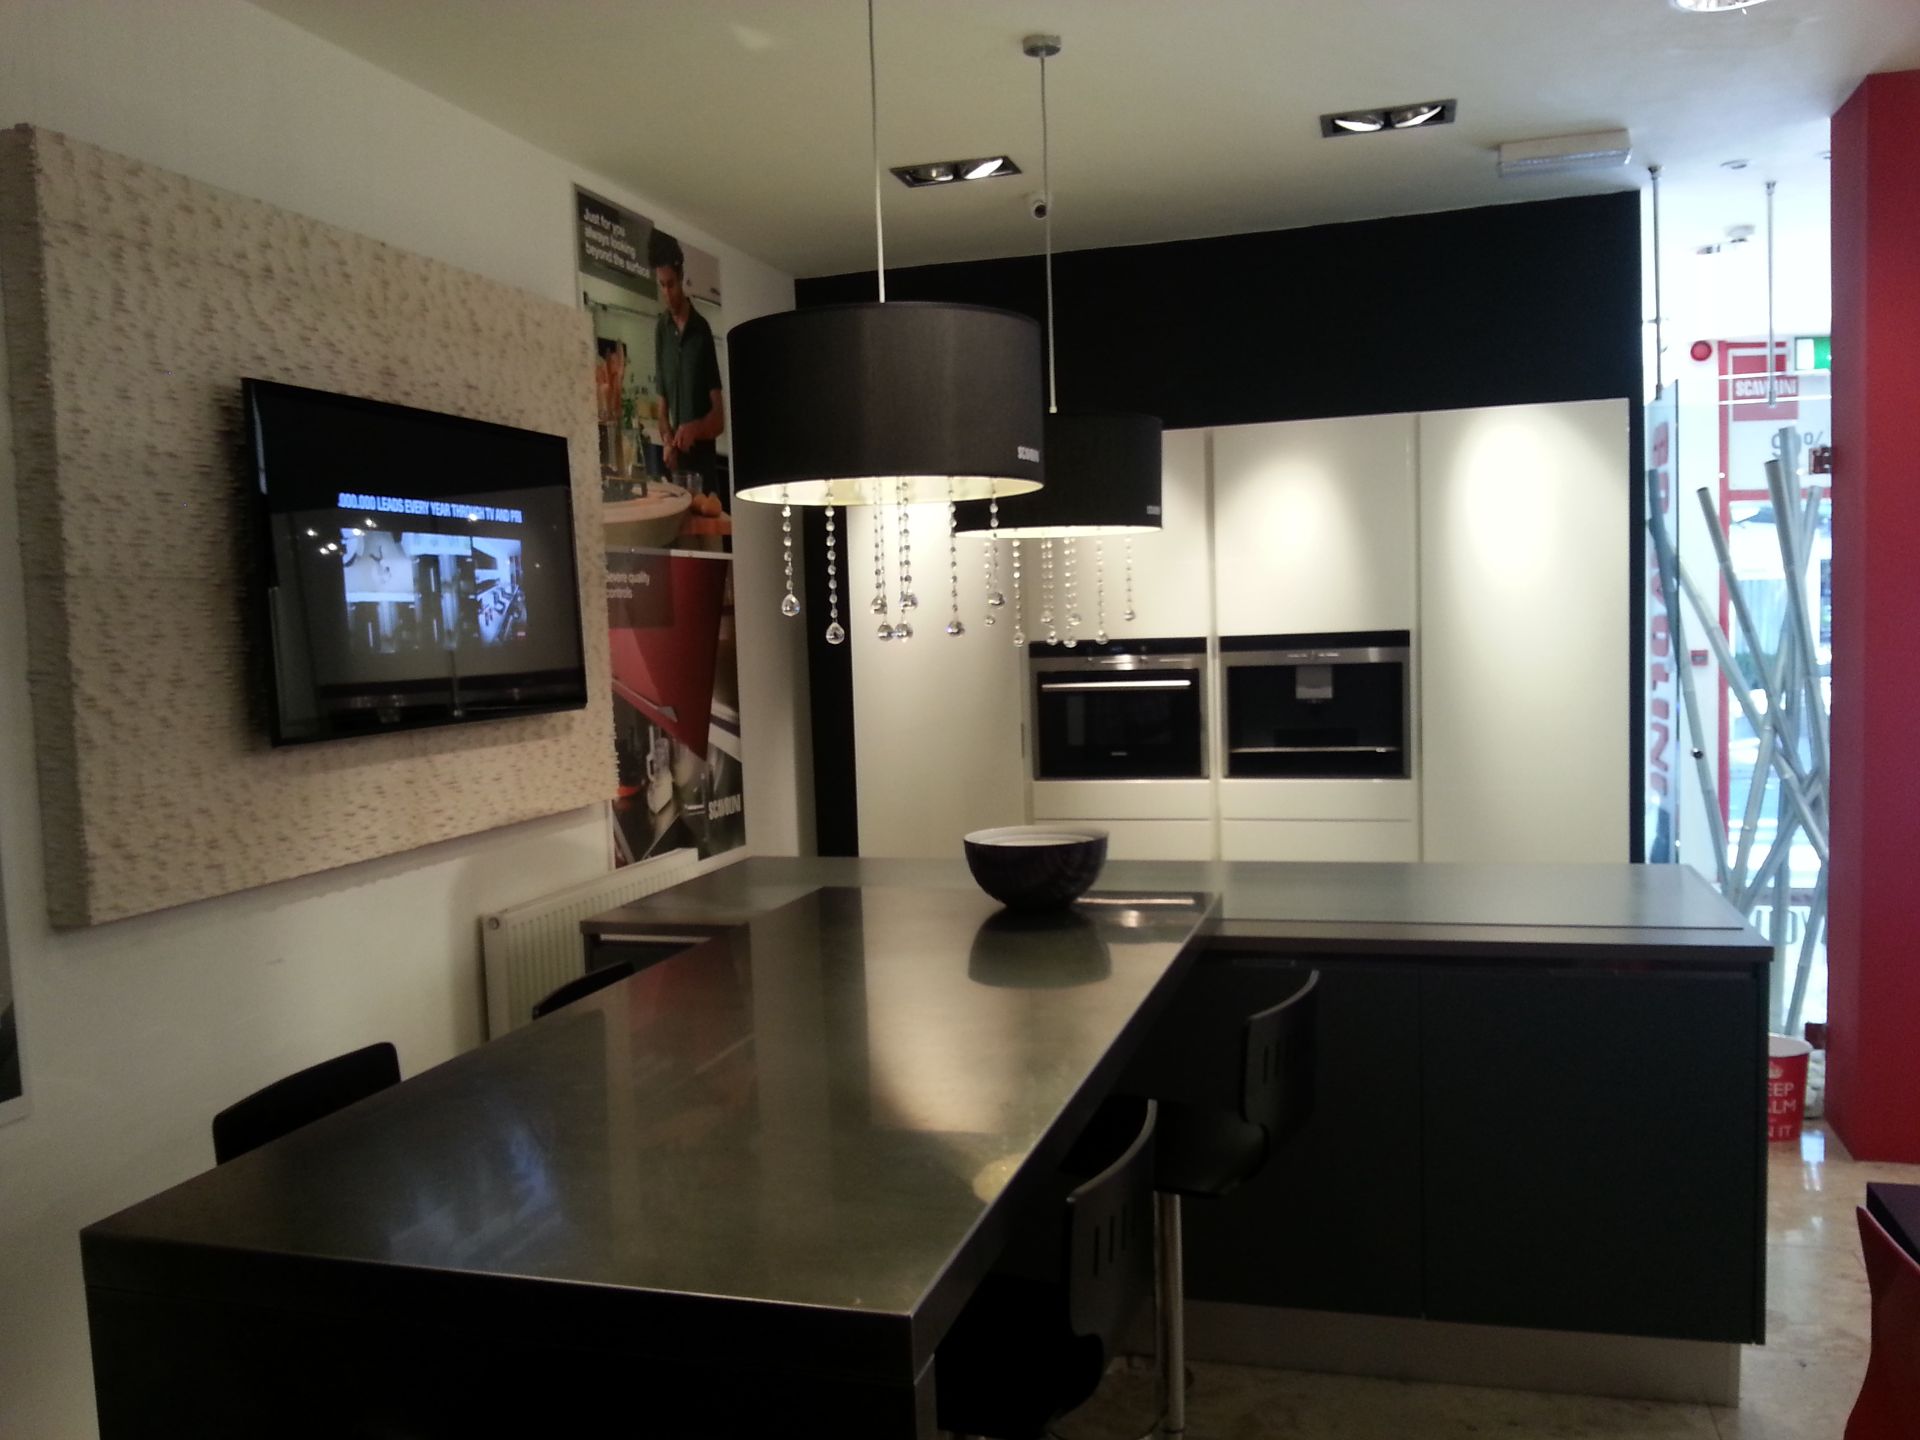 This is KITCHEN NO 2. SCAVOLINI SCENERY Please see images and plan for number and size of the